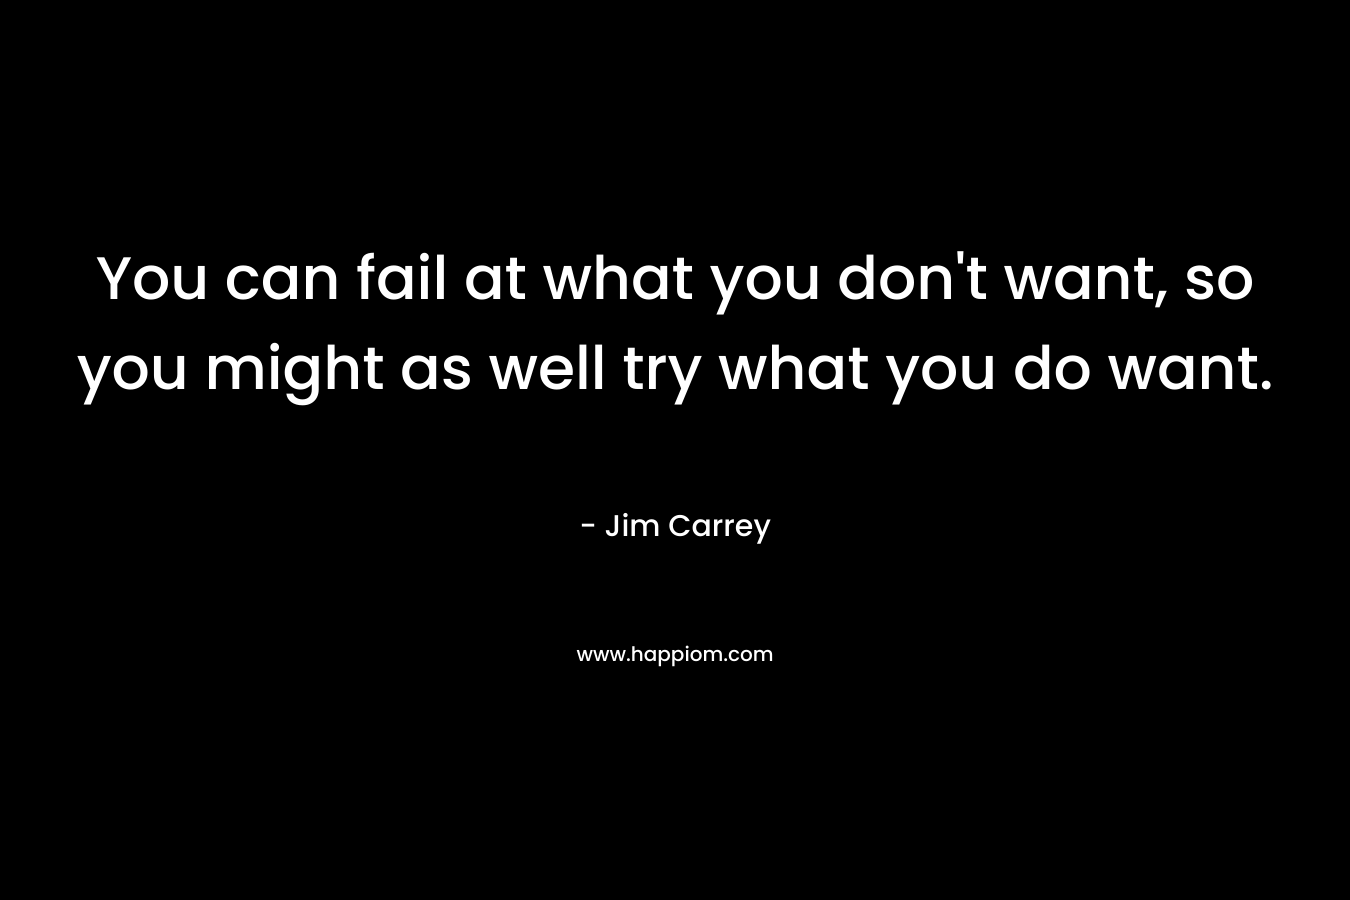 You can fail at what you don't want, so you might as well try what you do want.